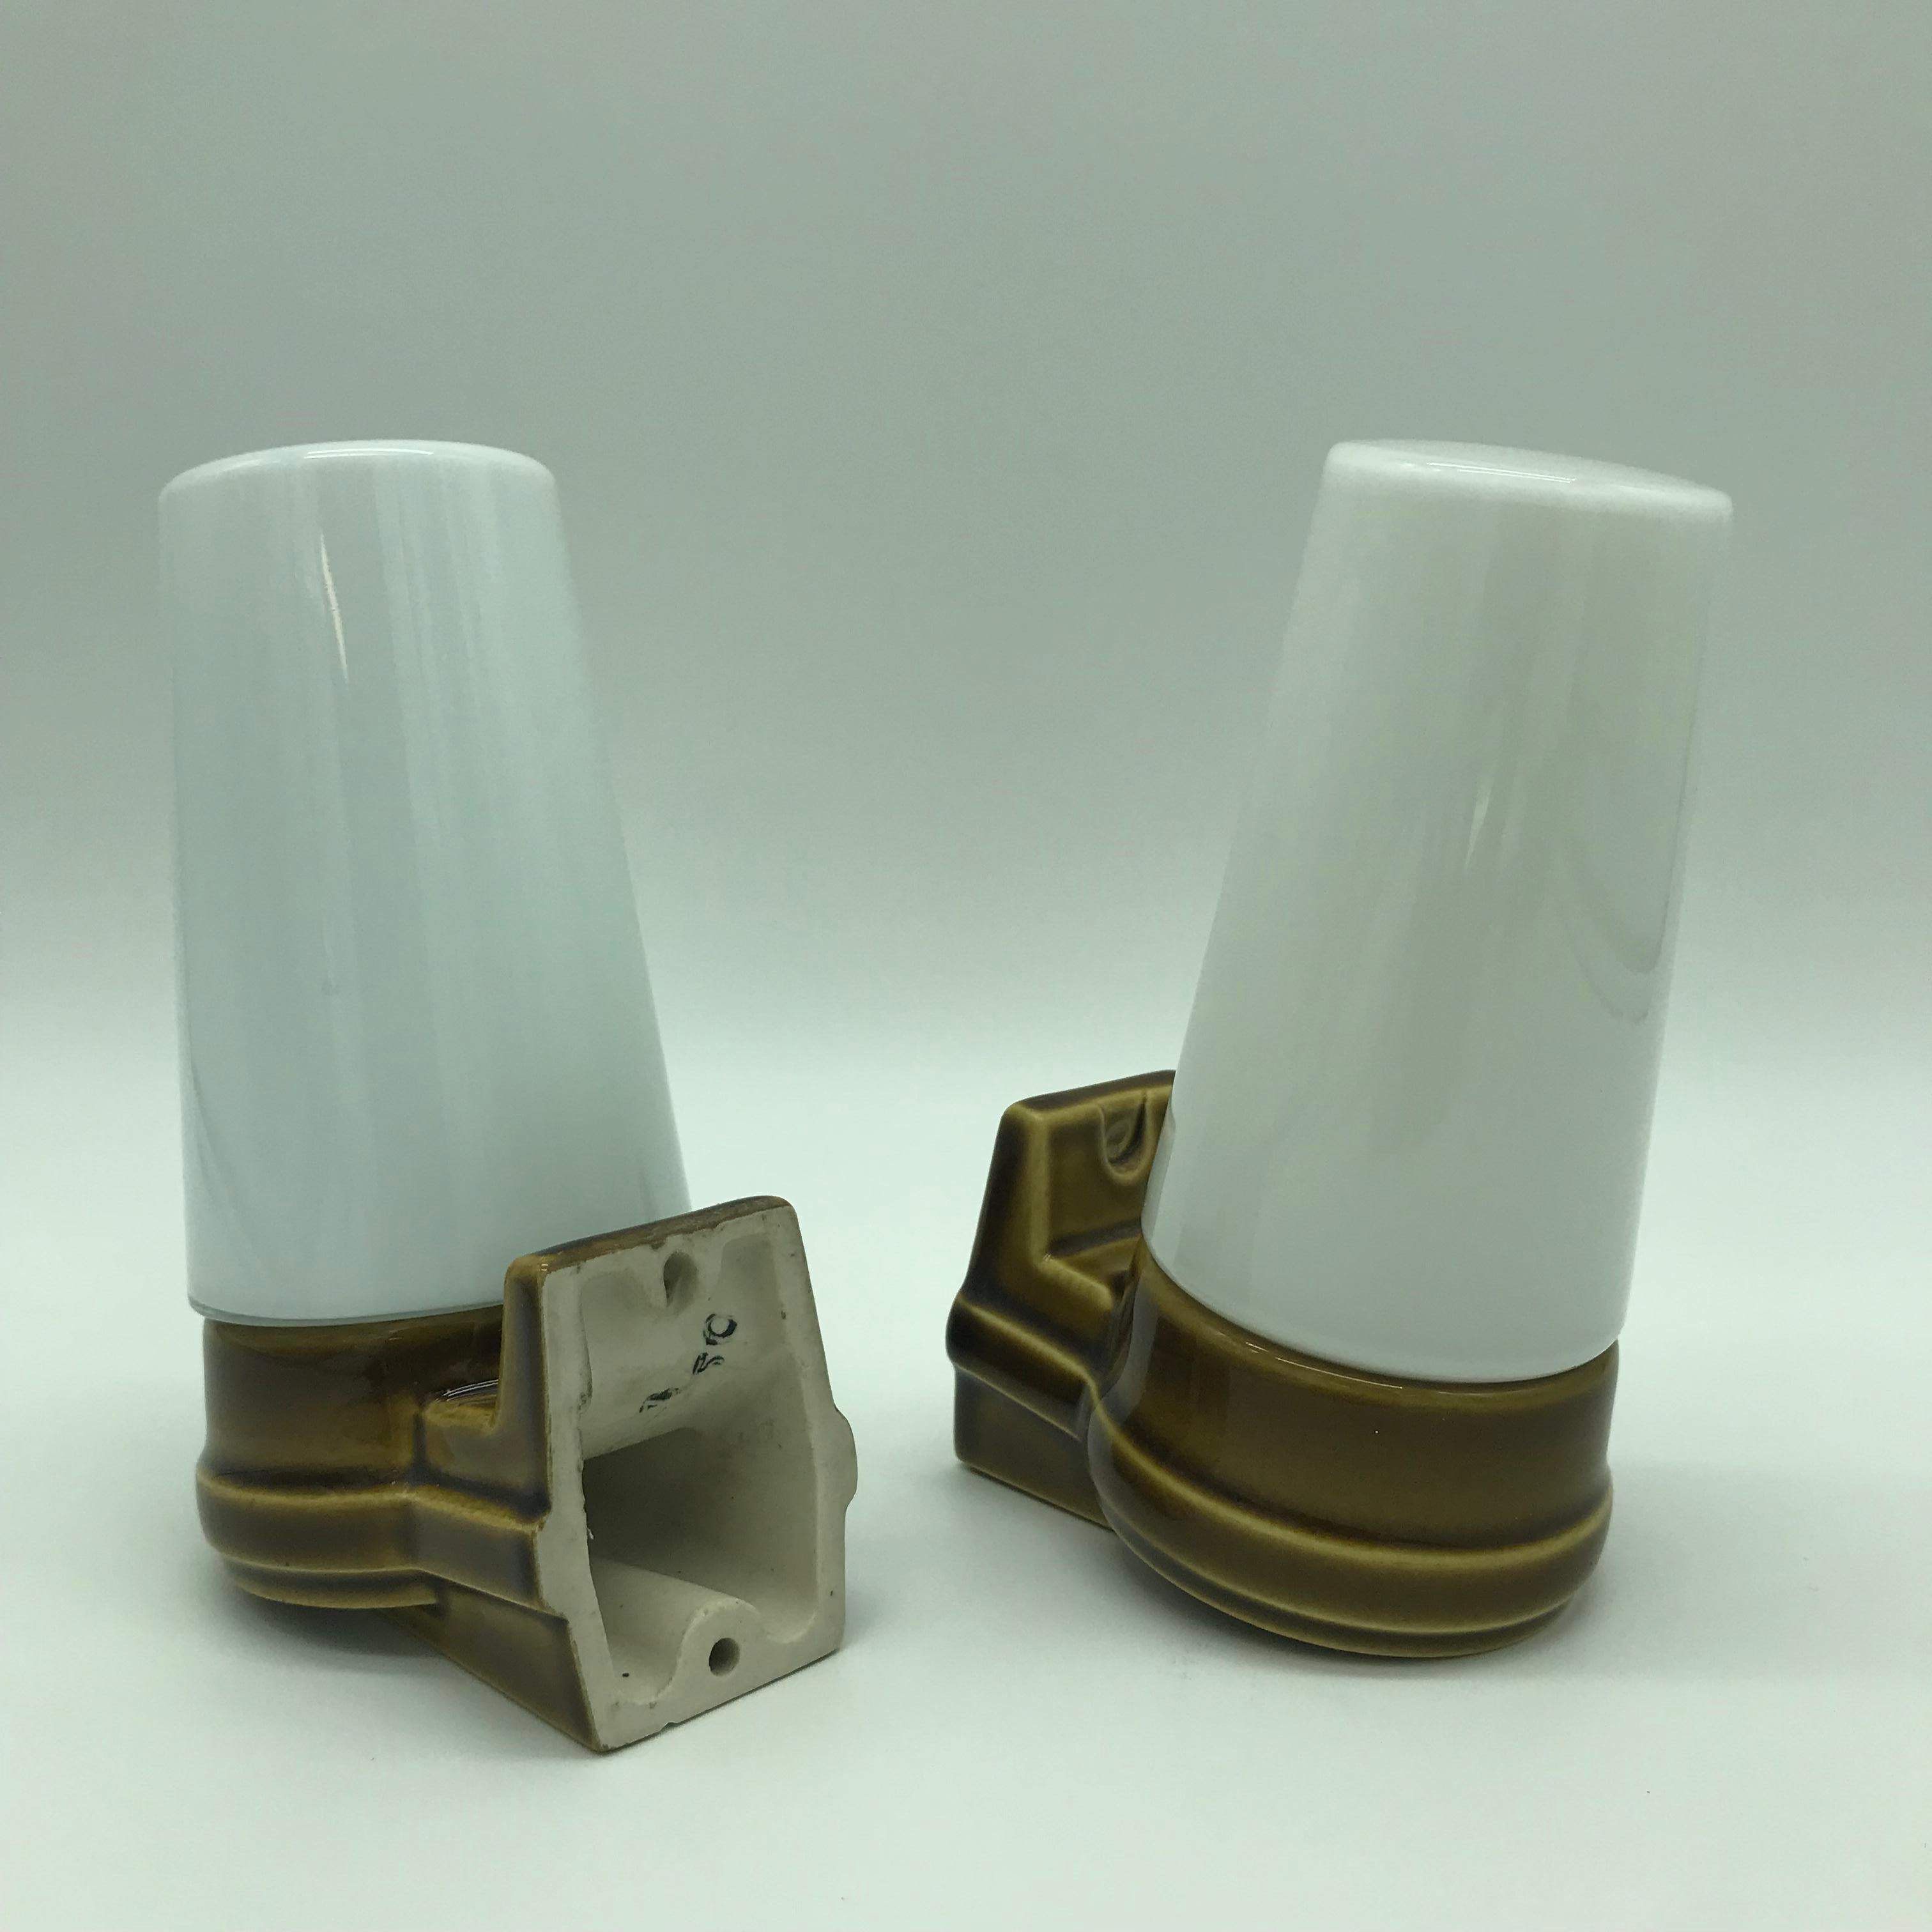 A pair of vintage Ifö of Sweden ceramic bathroom lamps from the 1960s 
Opaline glass shades 
Ceramic bulb holders for an E15 bulb 
In great condition and ready to use.
Designed by Sigvard Oscar Fredrik Bernadotte, Prince Bernadotte, Count of